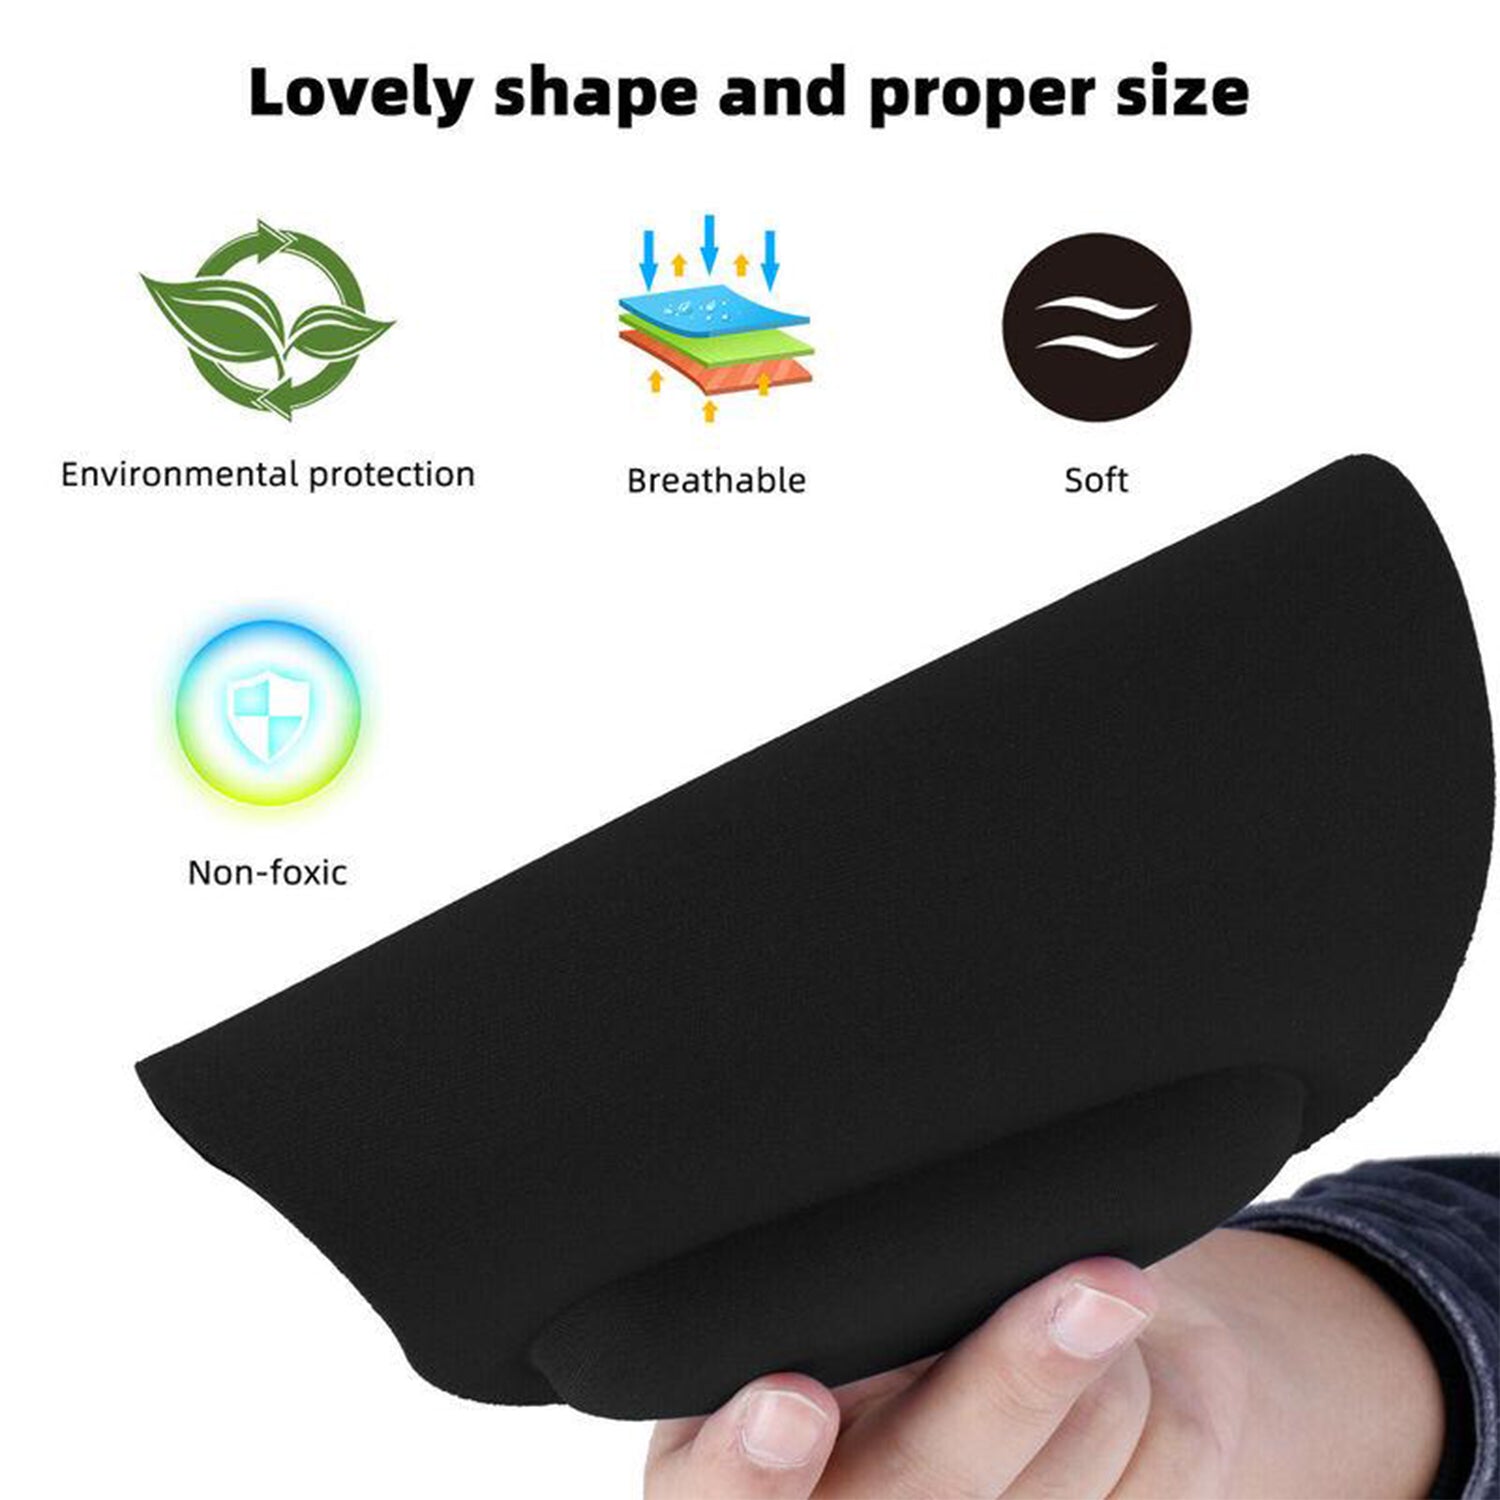 6161 Wrist S Mouse Pad Used For Mouse While Using Computer. freeshipping DeoDap